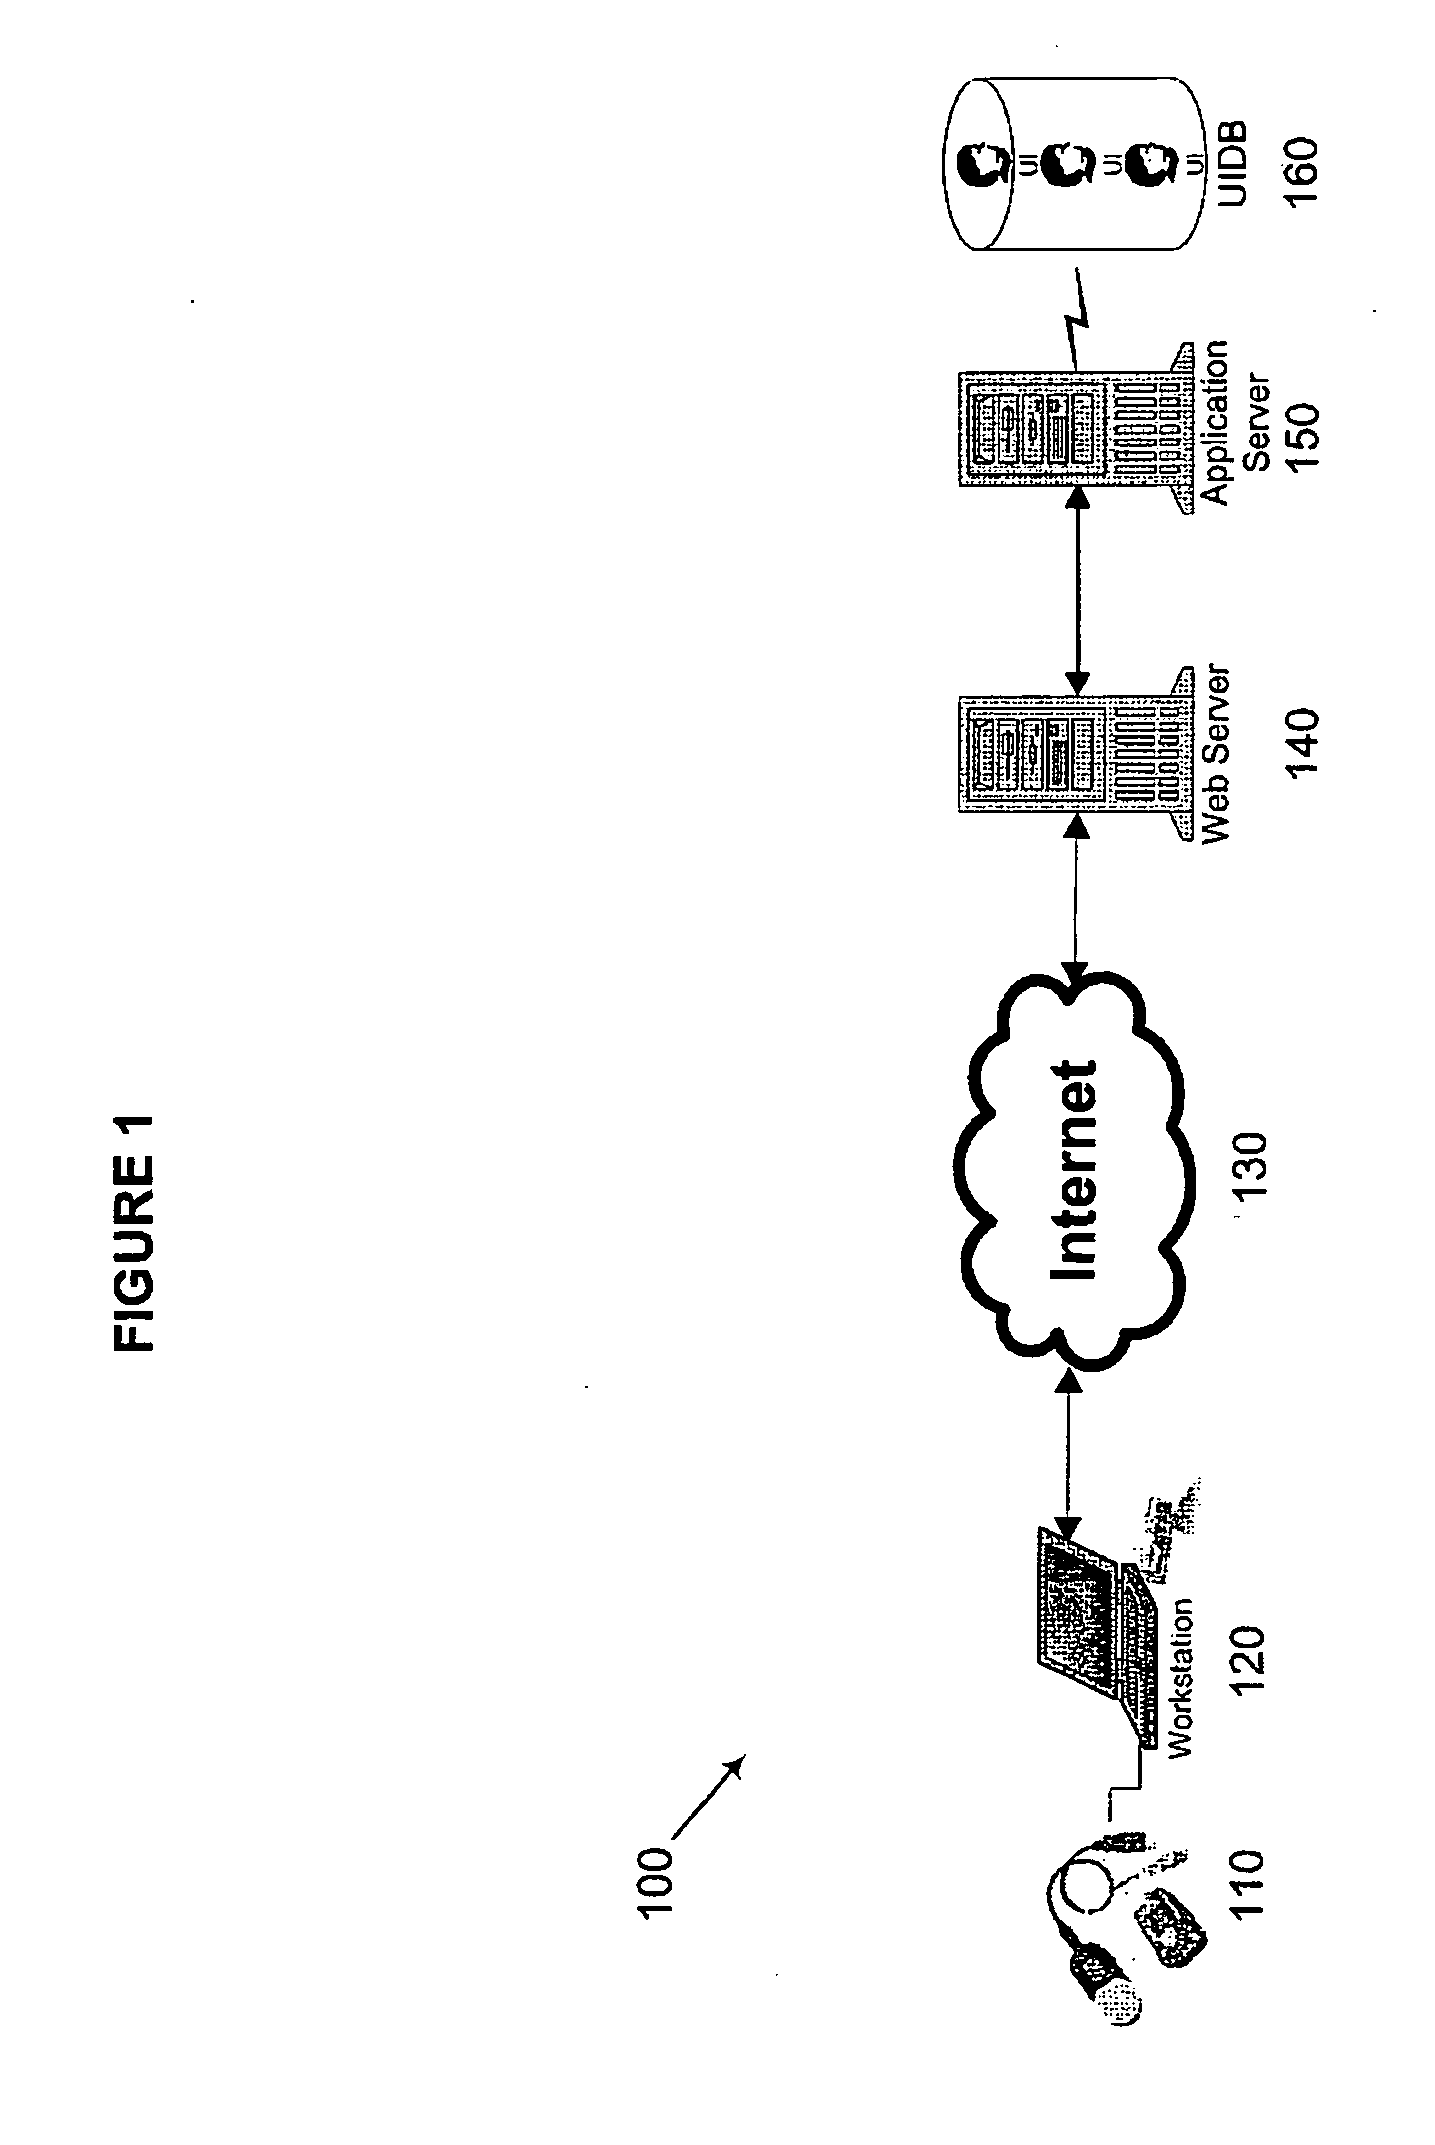 Method and system for biometric authentication of user feedback